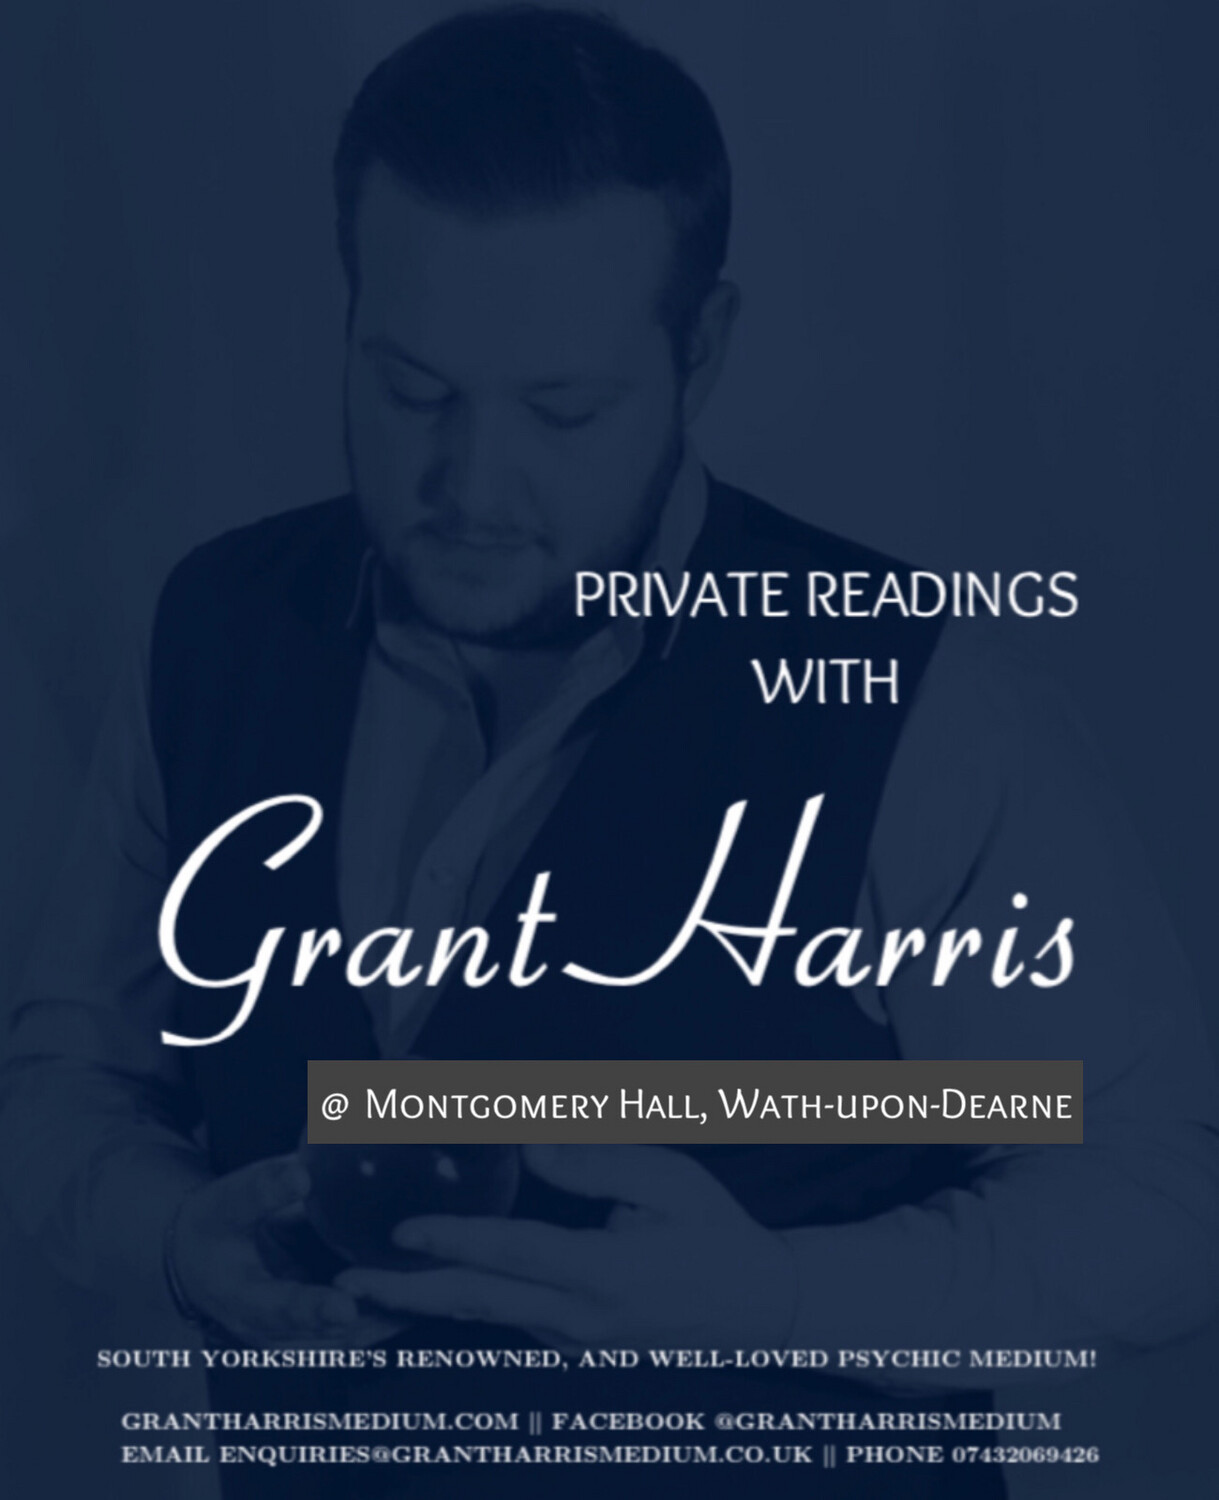 A Face To Face Reading with Grant @ Montgomery Hall, Wath-upon-Dearne